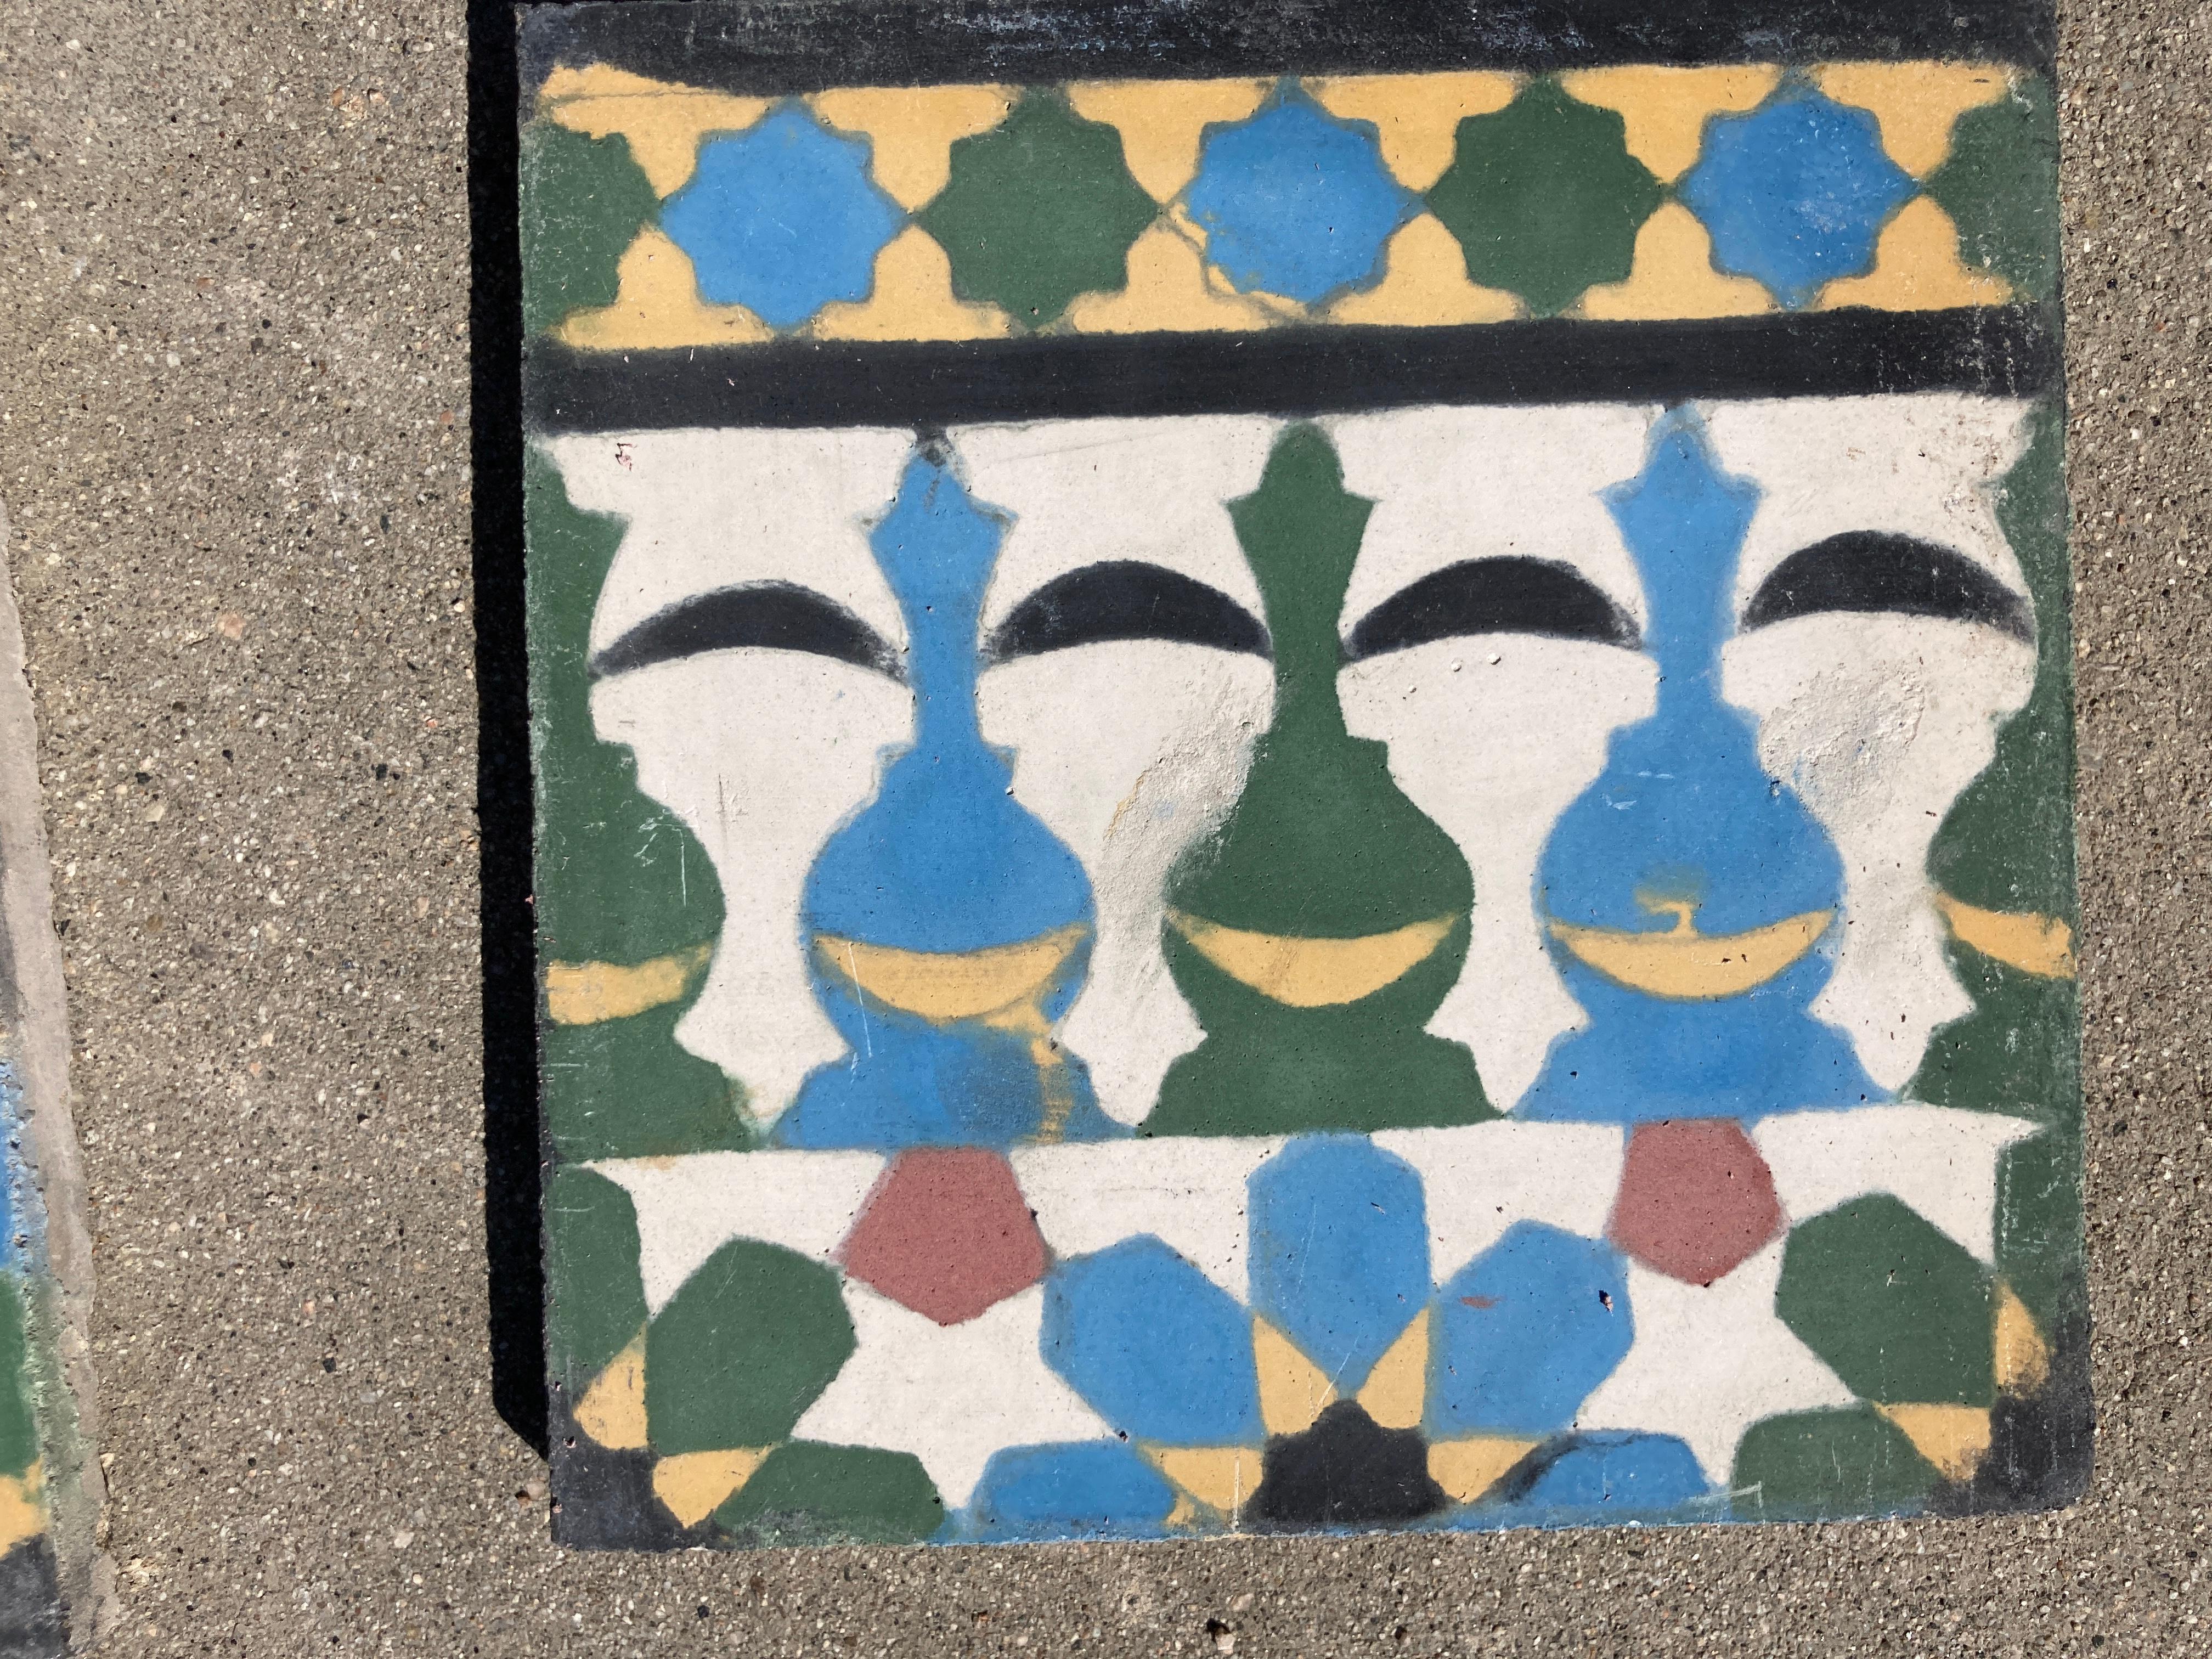 Moroccan handcrafted cement tile with traditional Fez Moorish design.
These are authentic Moroccan encaustic tiles hand made by artisans in Fez Morocco.
This is the traditional Moroccan Moorish design, great to use in any room to add charm to the